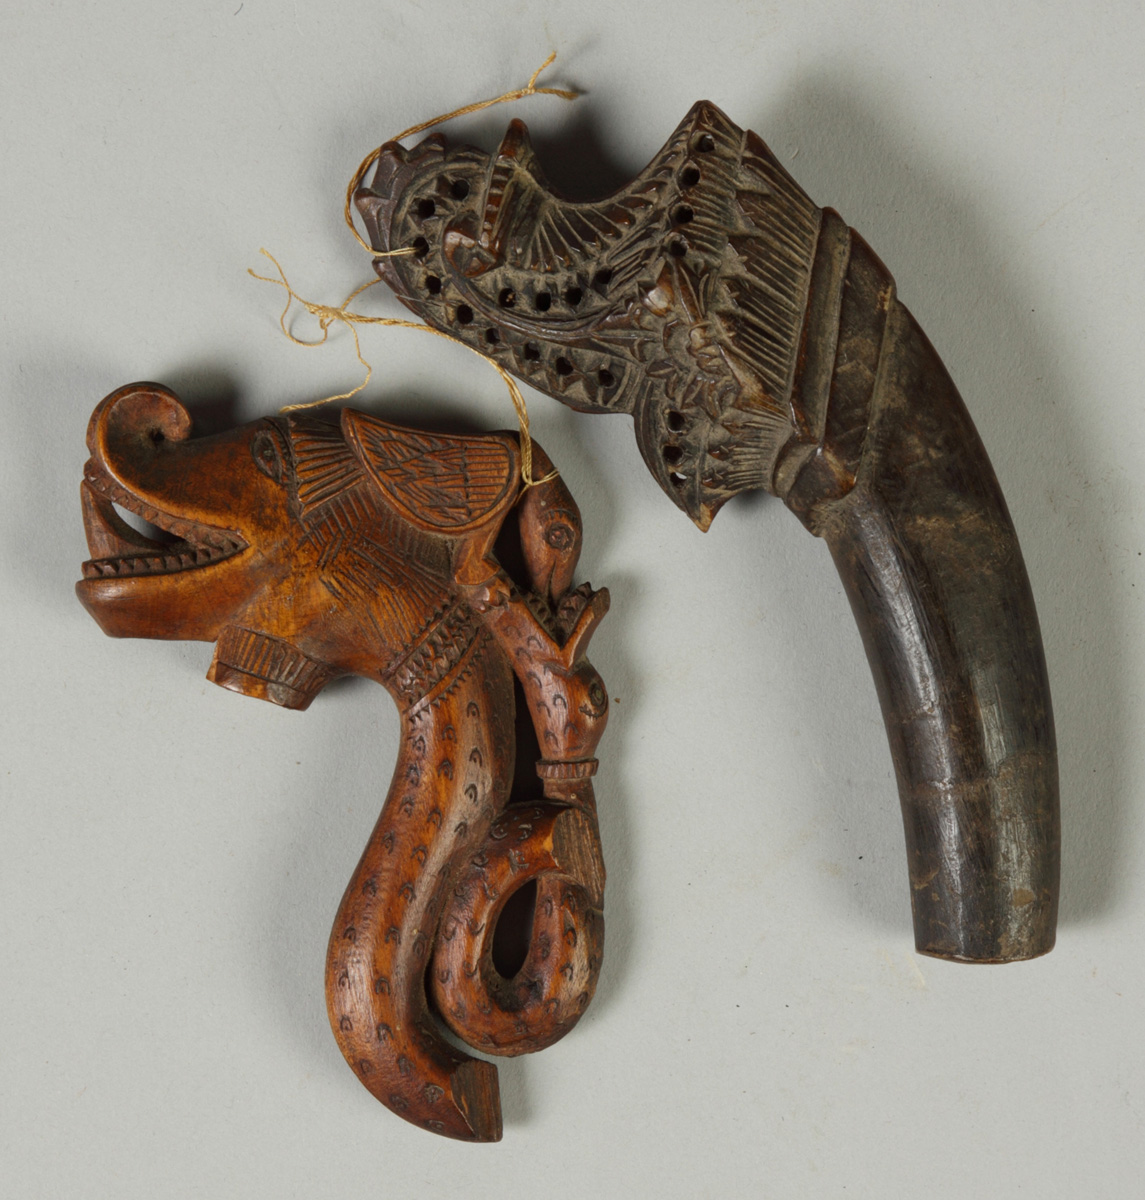 2 Cris Carved Tribal Handles from